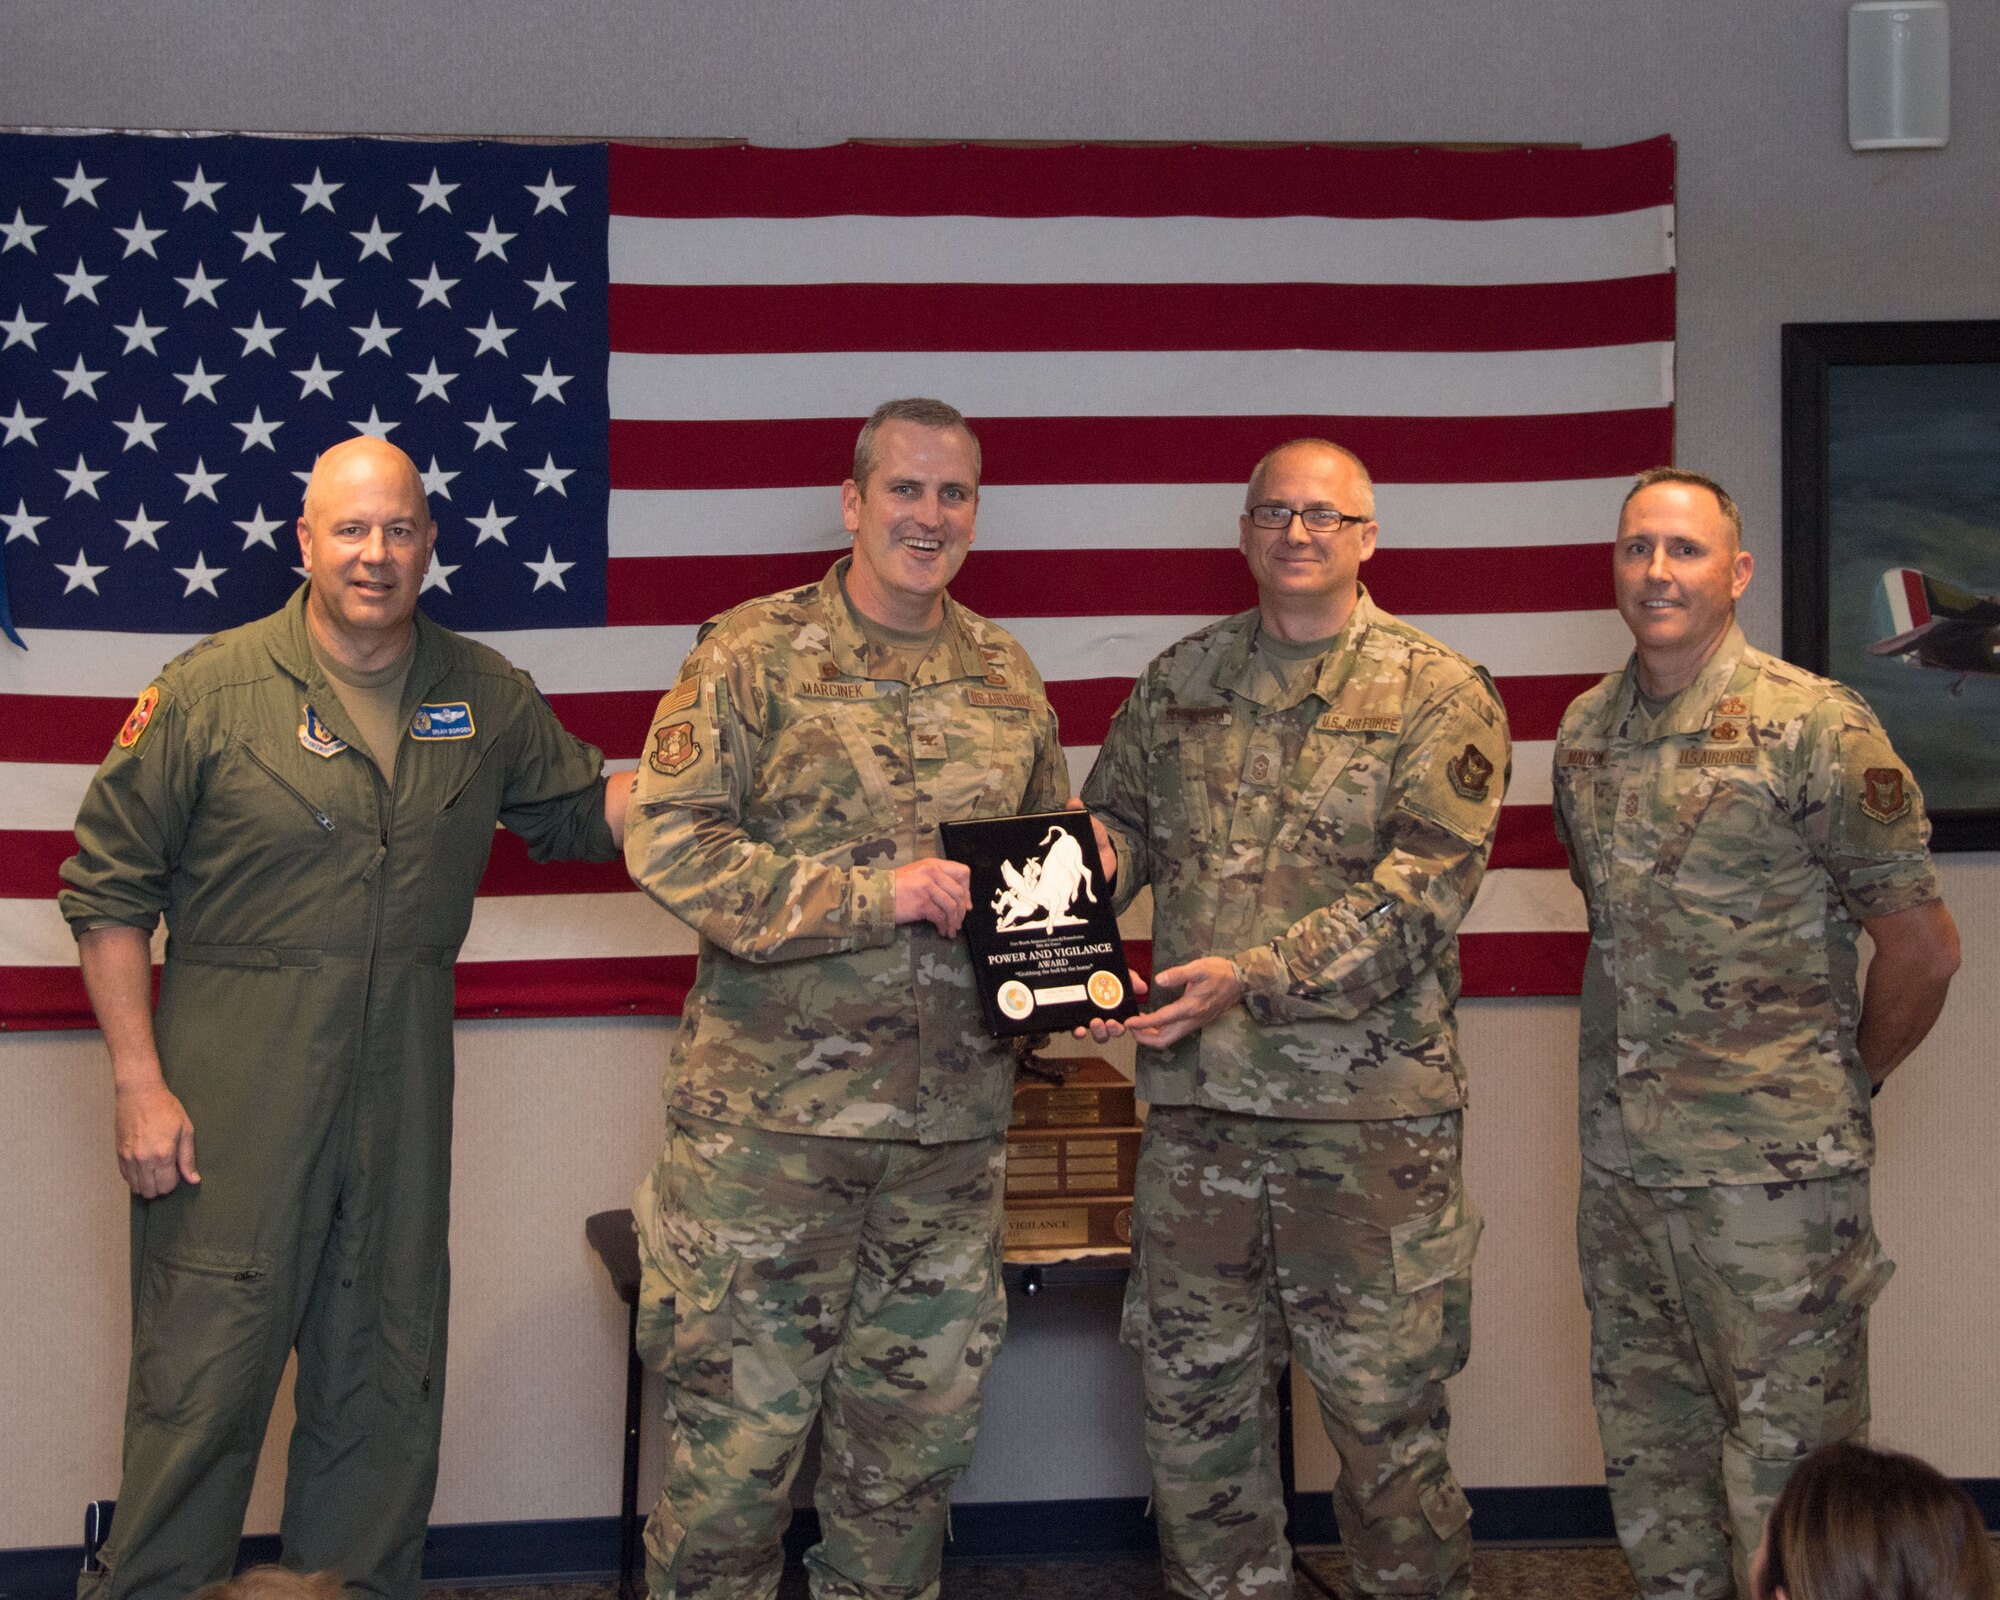 Maj. Gen. Brian Borgen, Tenth Air Force Commander and Chief Master Sgt. Jeremy Malcom, Tenth Air Force Command Chief, present the Power and Vigilance Award to Col. Joseph Marcinek, 655th Intelligence, Surveillance, and Reconnaissance Wing Commander and Chief Master Sgt. Bohdan Pywowarczuk II, 655th ISRW Command Chief.